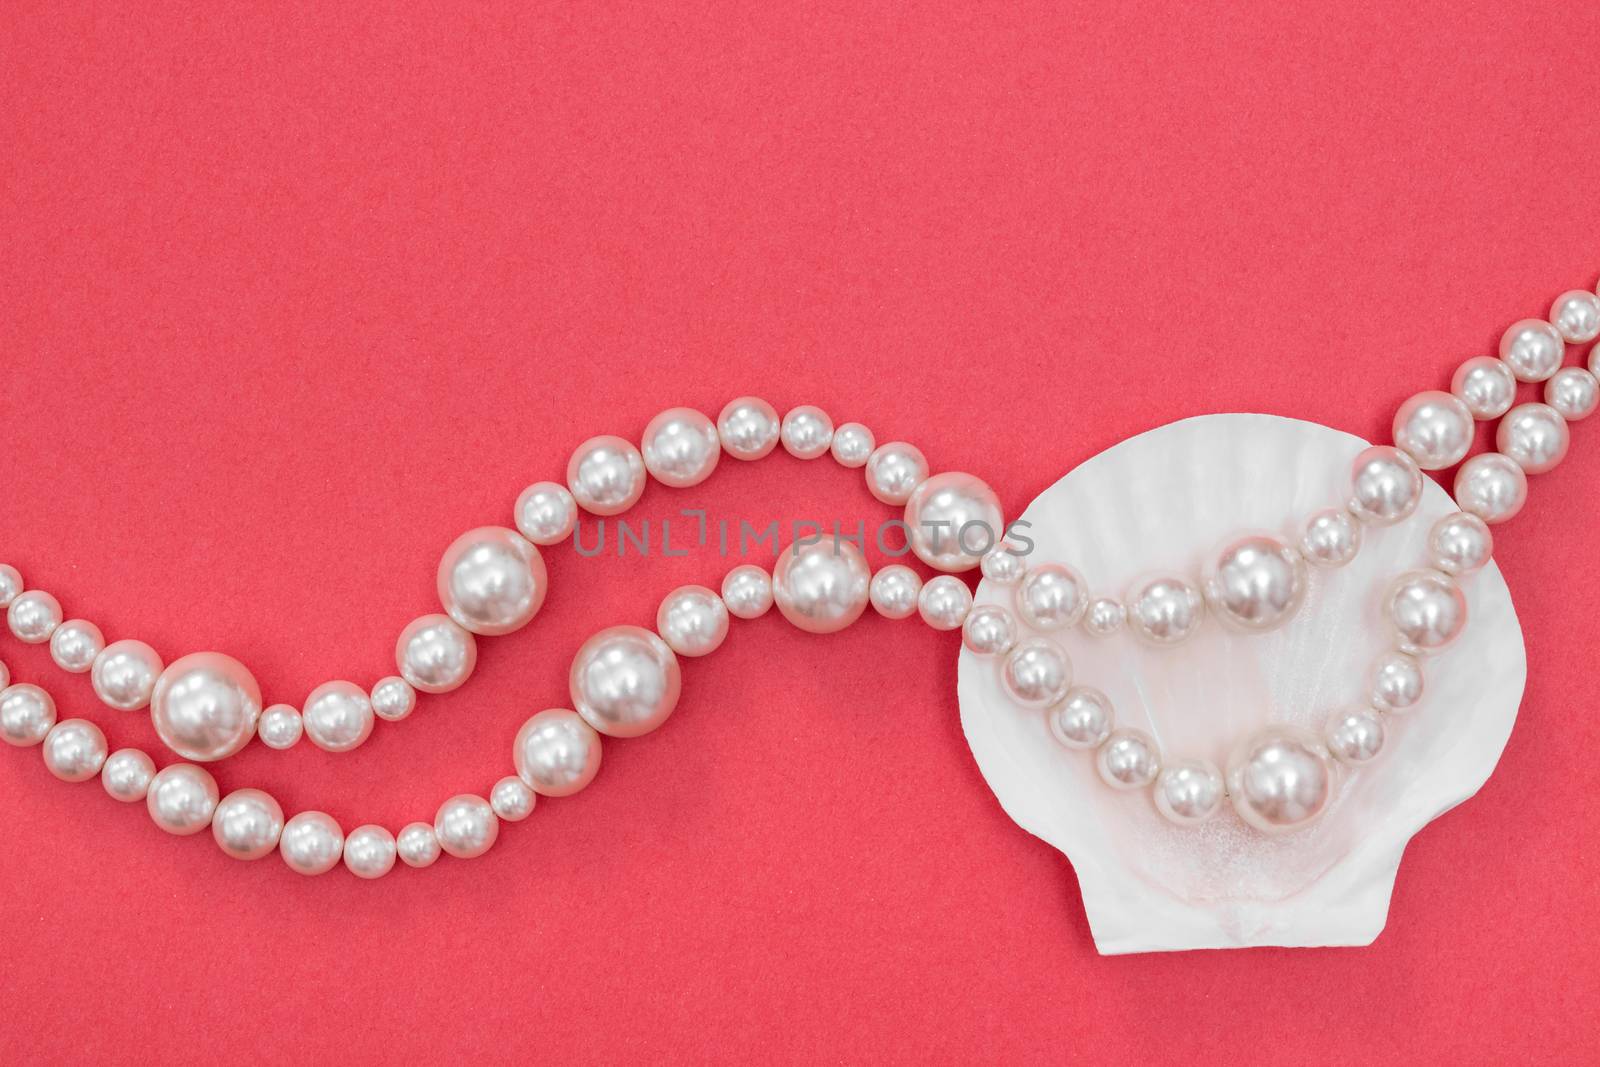 Pearl necklace and seashell on vibrant pink background. Fashion concept.